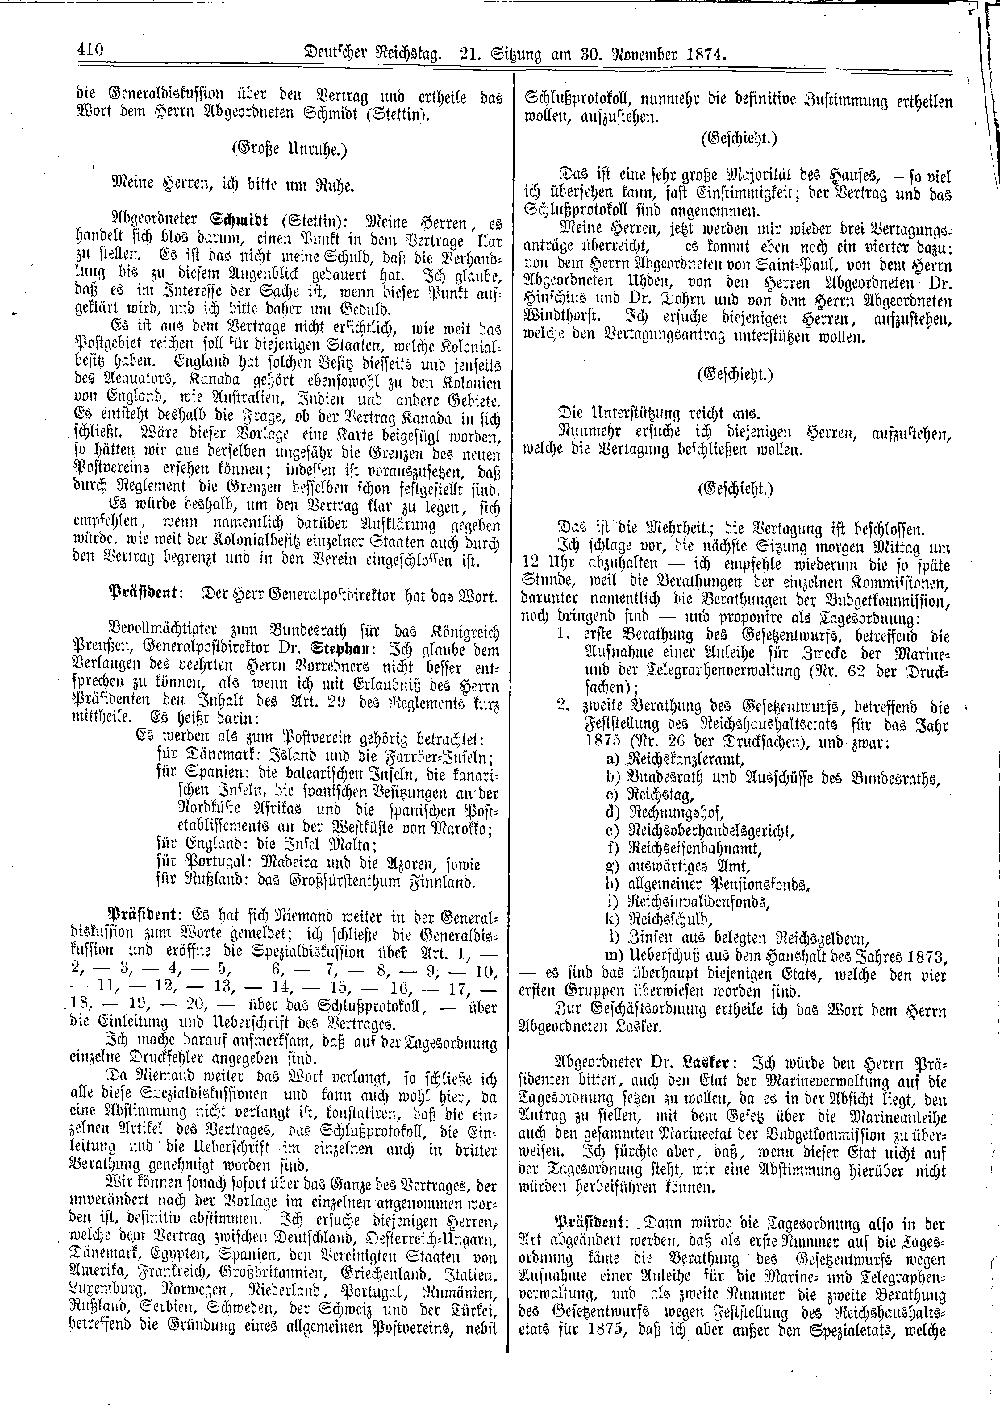 Scan of page 410